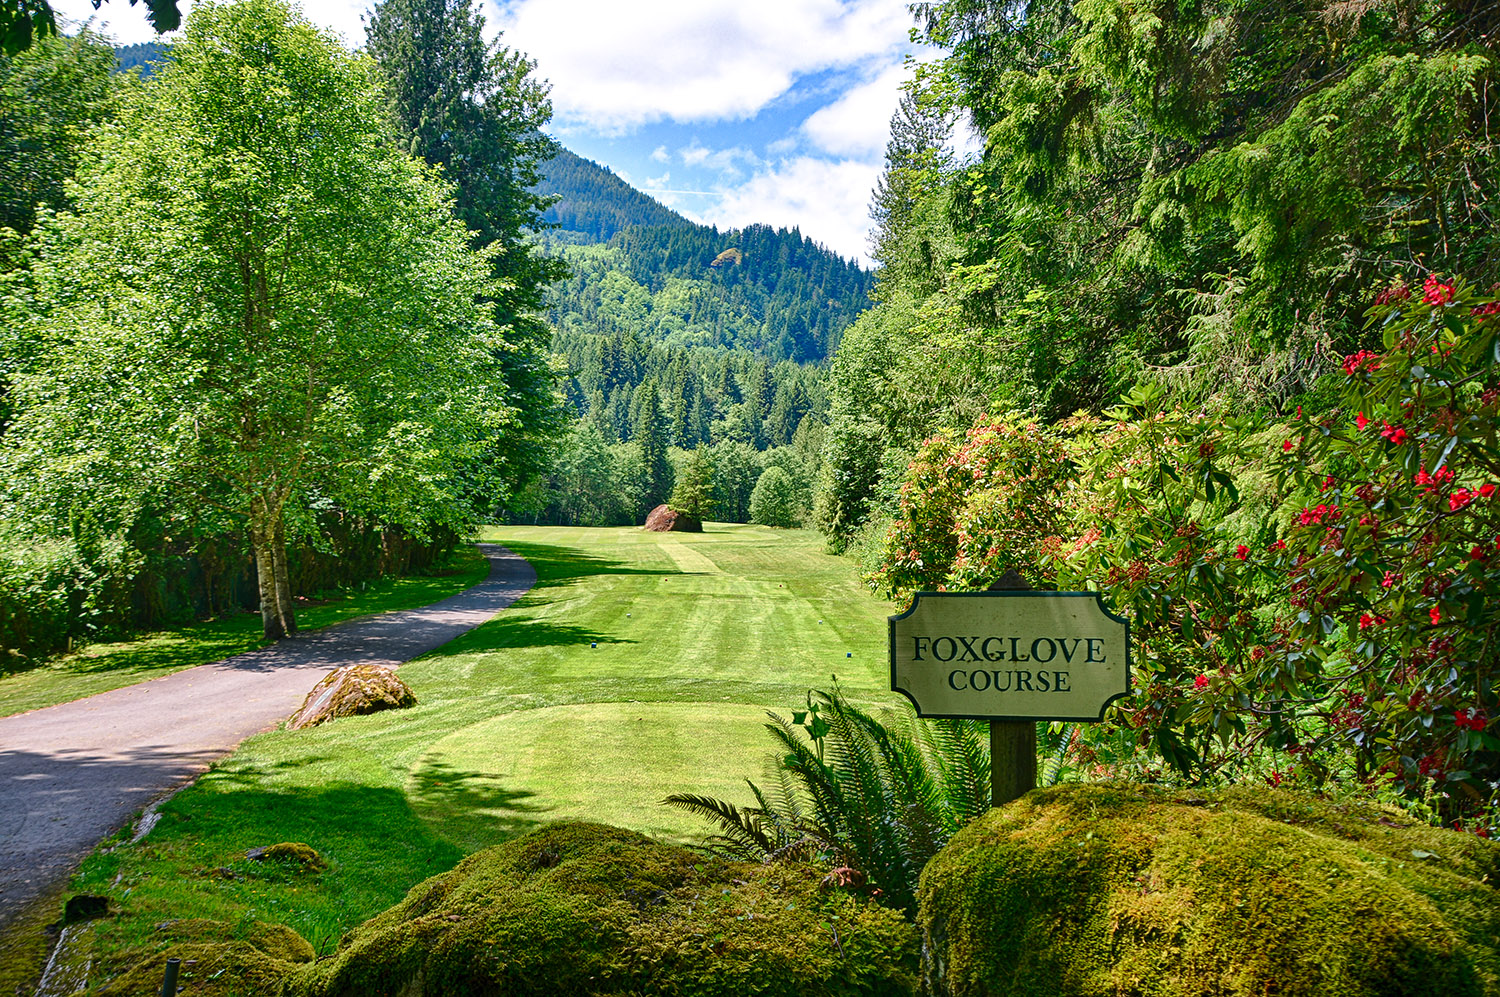 Foxglove Course - The Resort at the Mountain